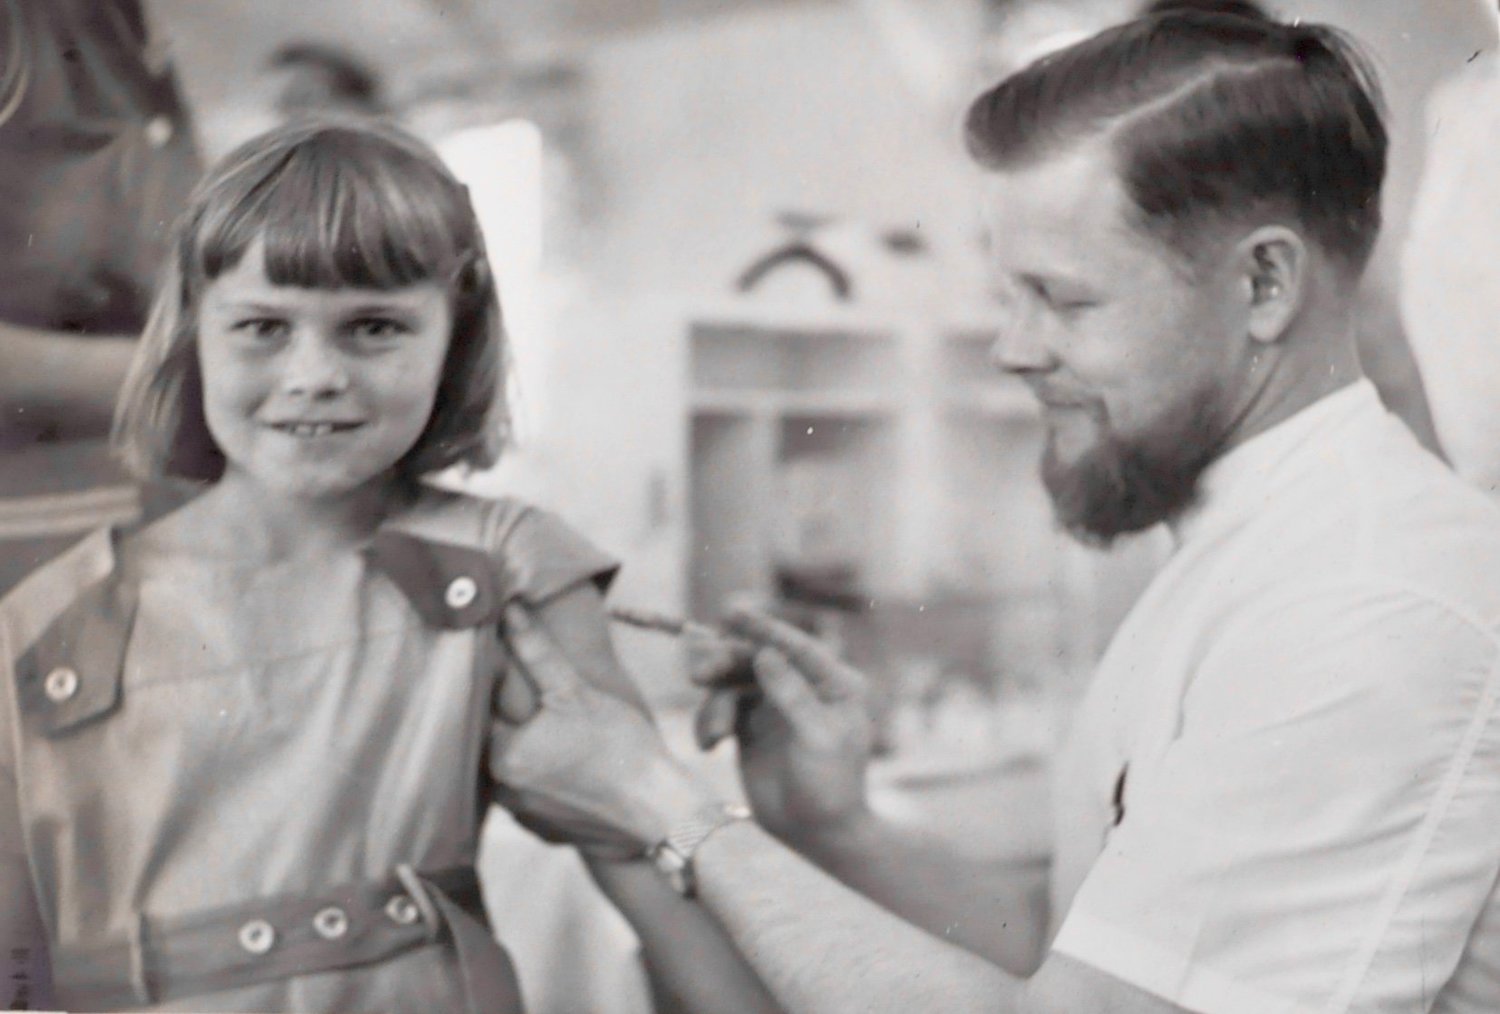 Dr. Tommy made the revolutionary decision to administer the polio vaccine to local elementary students in Webster County in 1955. His love for learning kept the doctor up-to-date on modern practices and medicine.